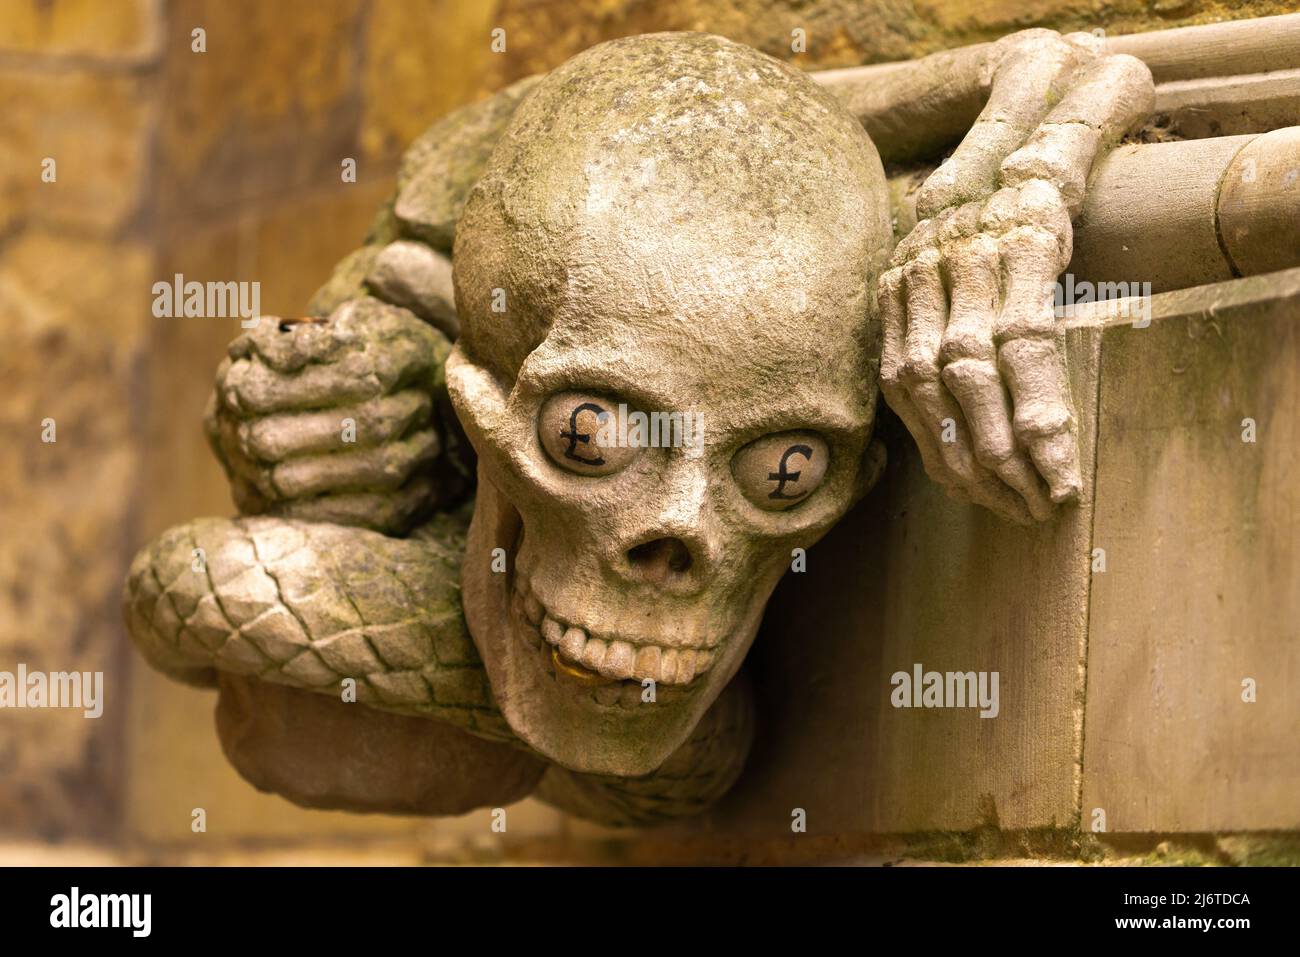 Gargoyles, stone statues, attached, buildings, decoration, waterspouts, rainwater flow, carved, solid stone, granite, ornamental, artistic function. Stock Photo